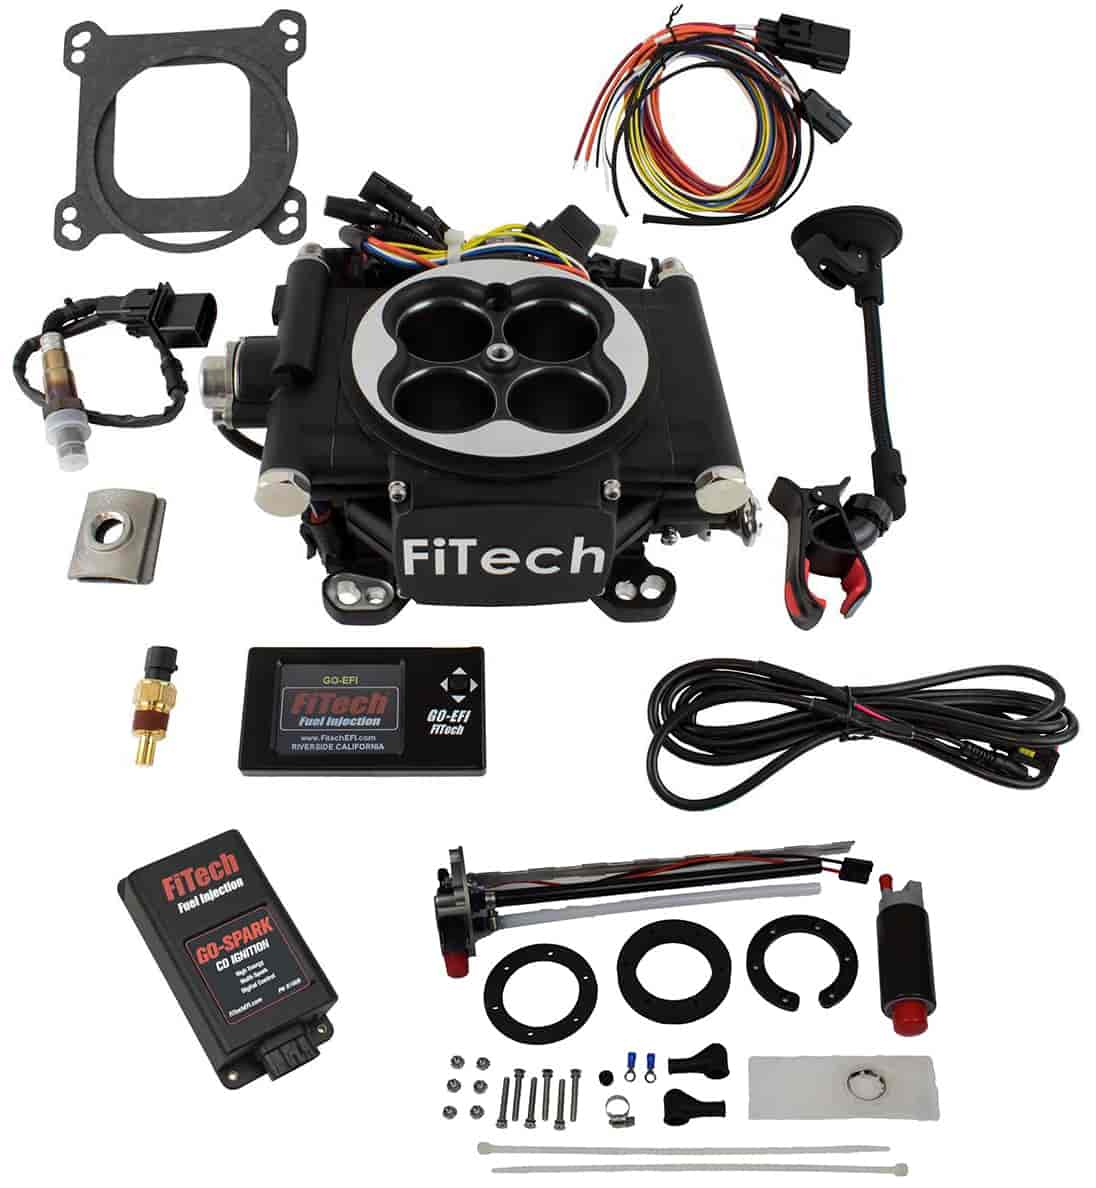 Go EFI-4 600 HP Throttle Body Fuel Injection Master Kit [With Go-Fuel Universal In-Tank Pump Module 340 LPH & CDI Box] Matte Bla